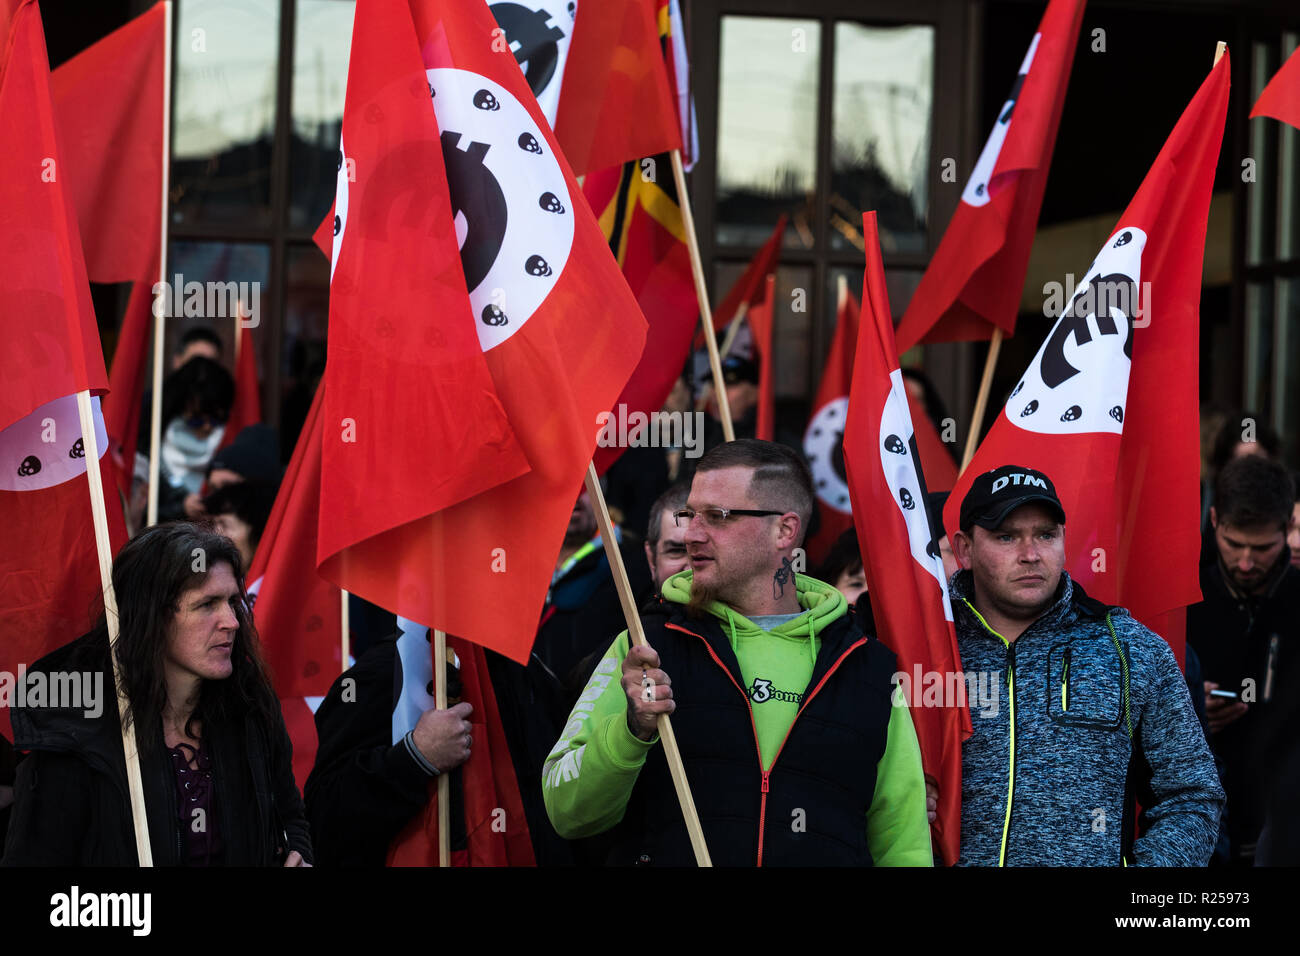 Counter protesters seen holding flags during the right-wing protest. Right-wing protests against Merkel's visit to Chemnitz, Deutschland. The Chancellor visited the city and talked to the citizens in a citizens' forum after protests and riots broke out in August after a violent death of a 35-year-old man from Chemnitz. Stock Photo